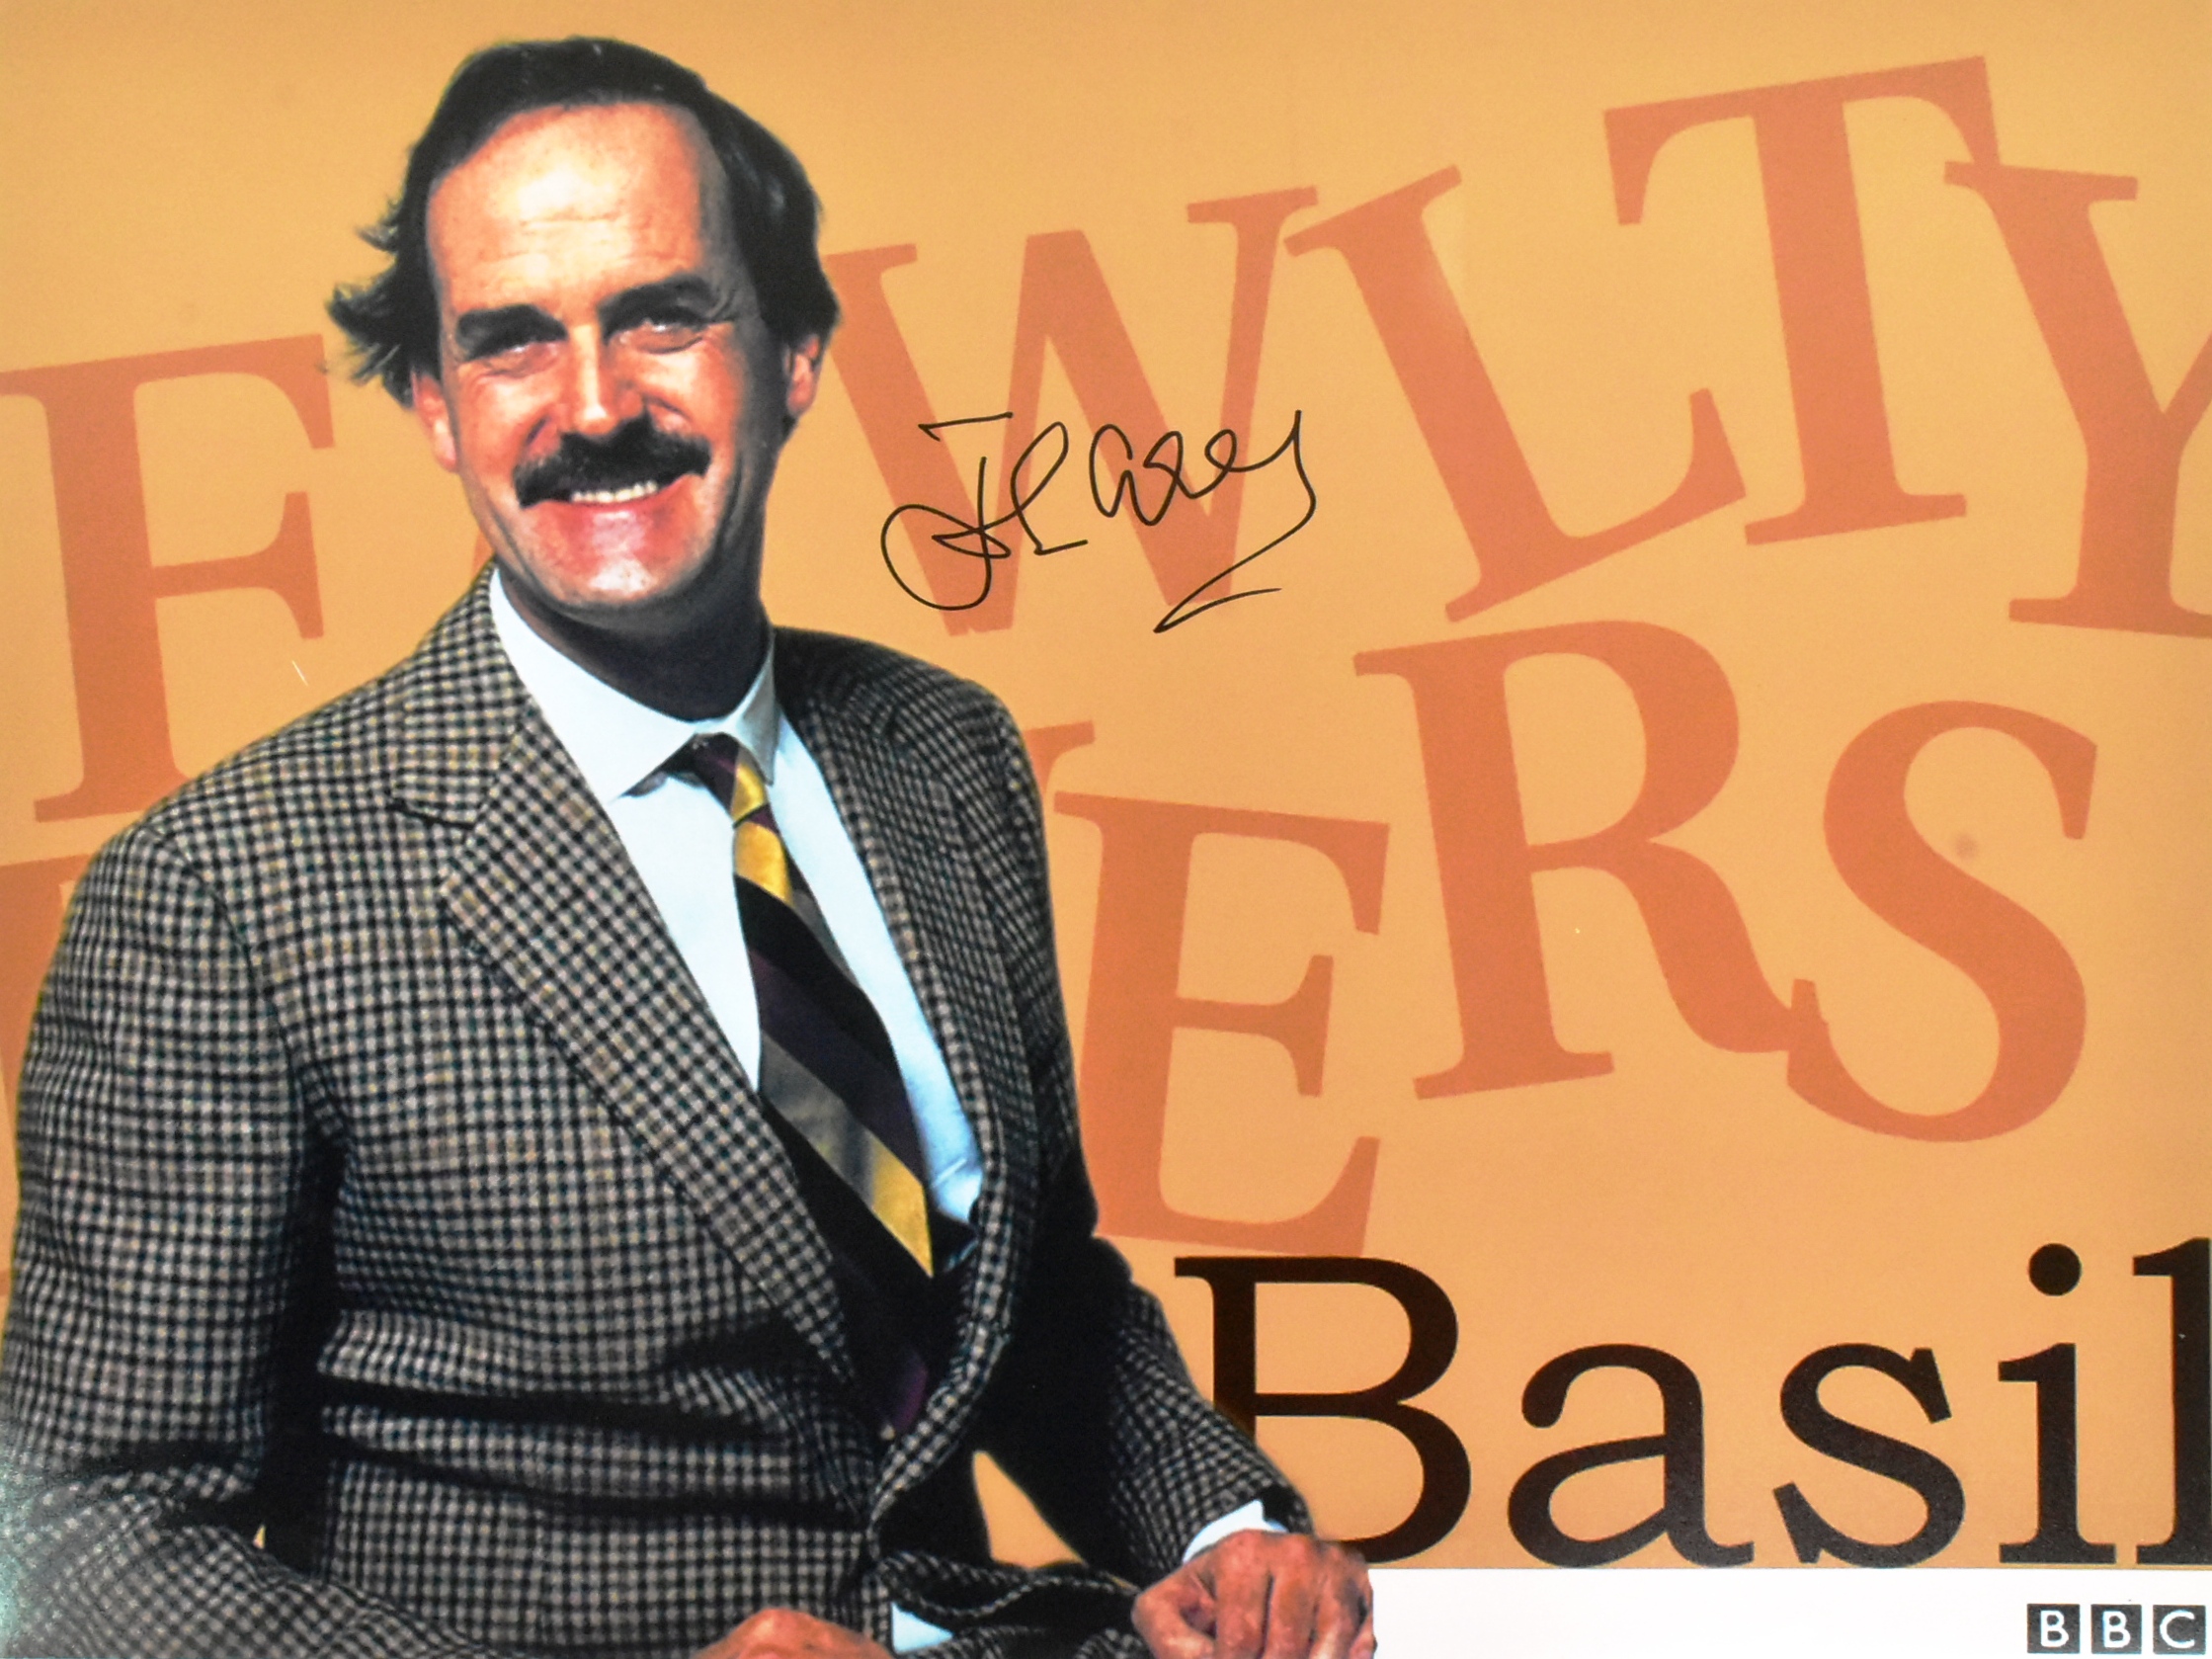 JOHN CLEESE - FAWLTY TOWERS - SIGNED 16X12" PHOTO - AFTAL